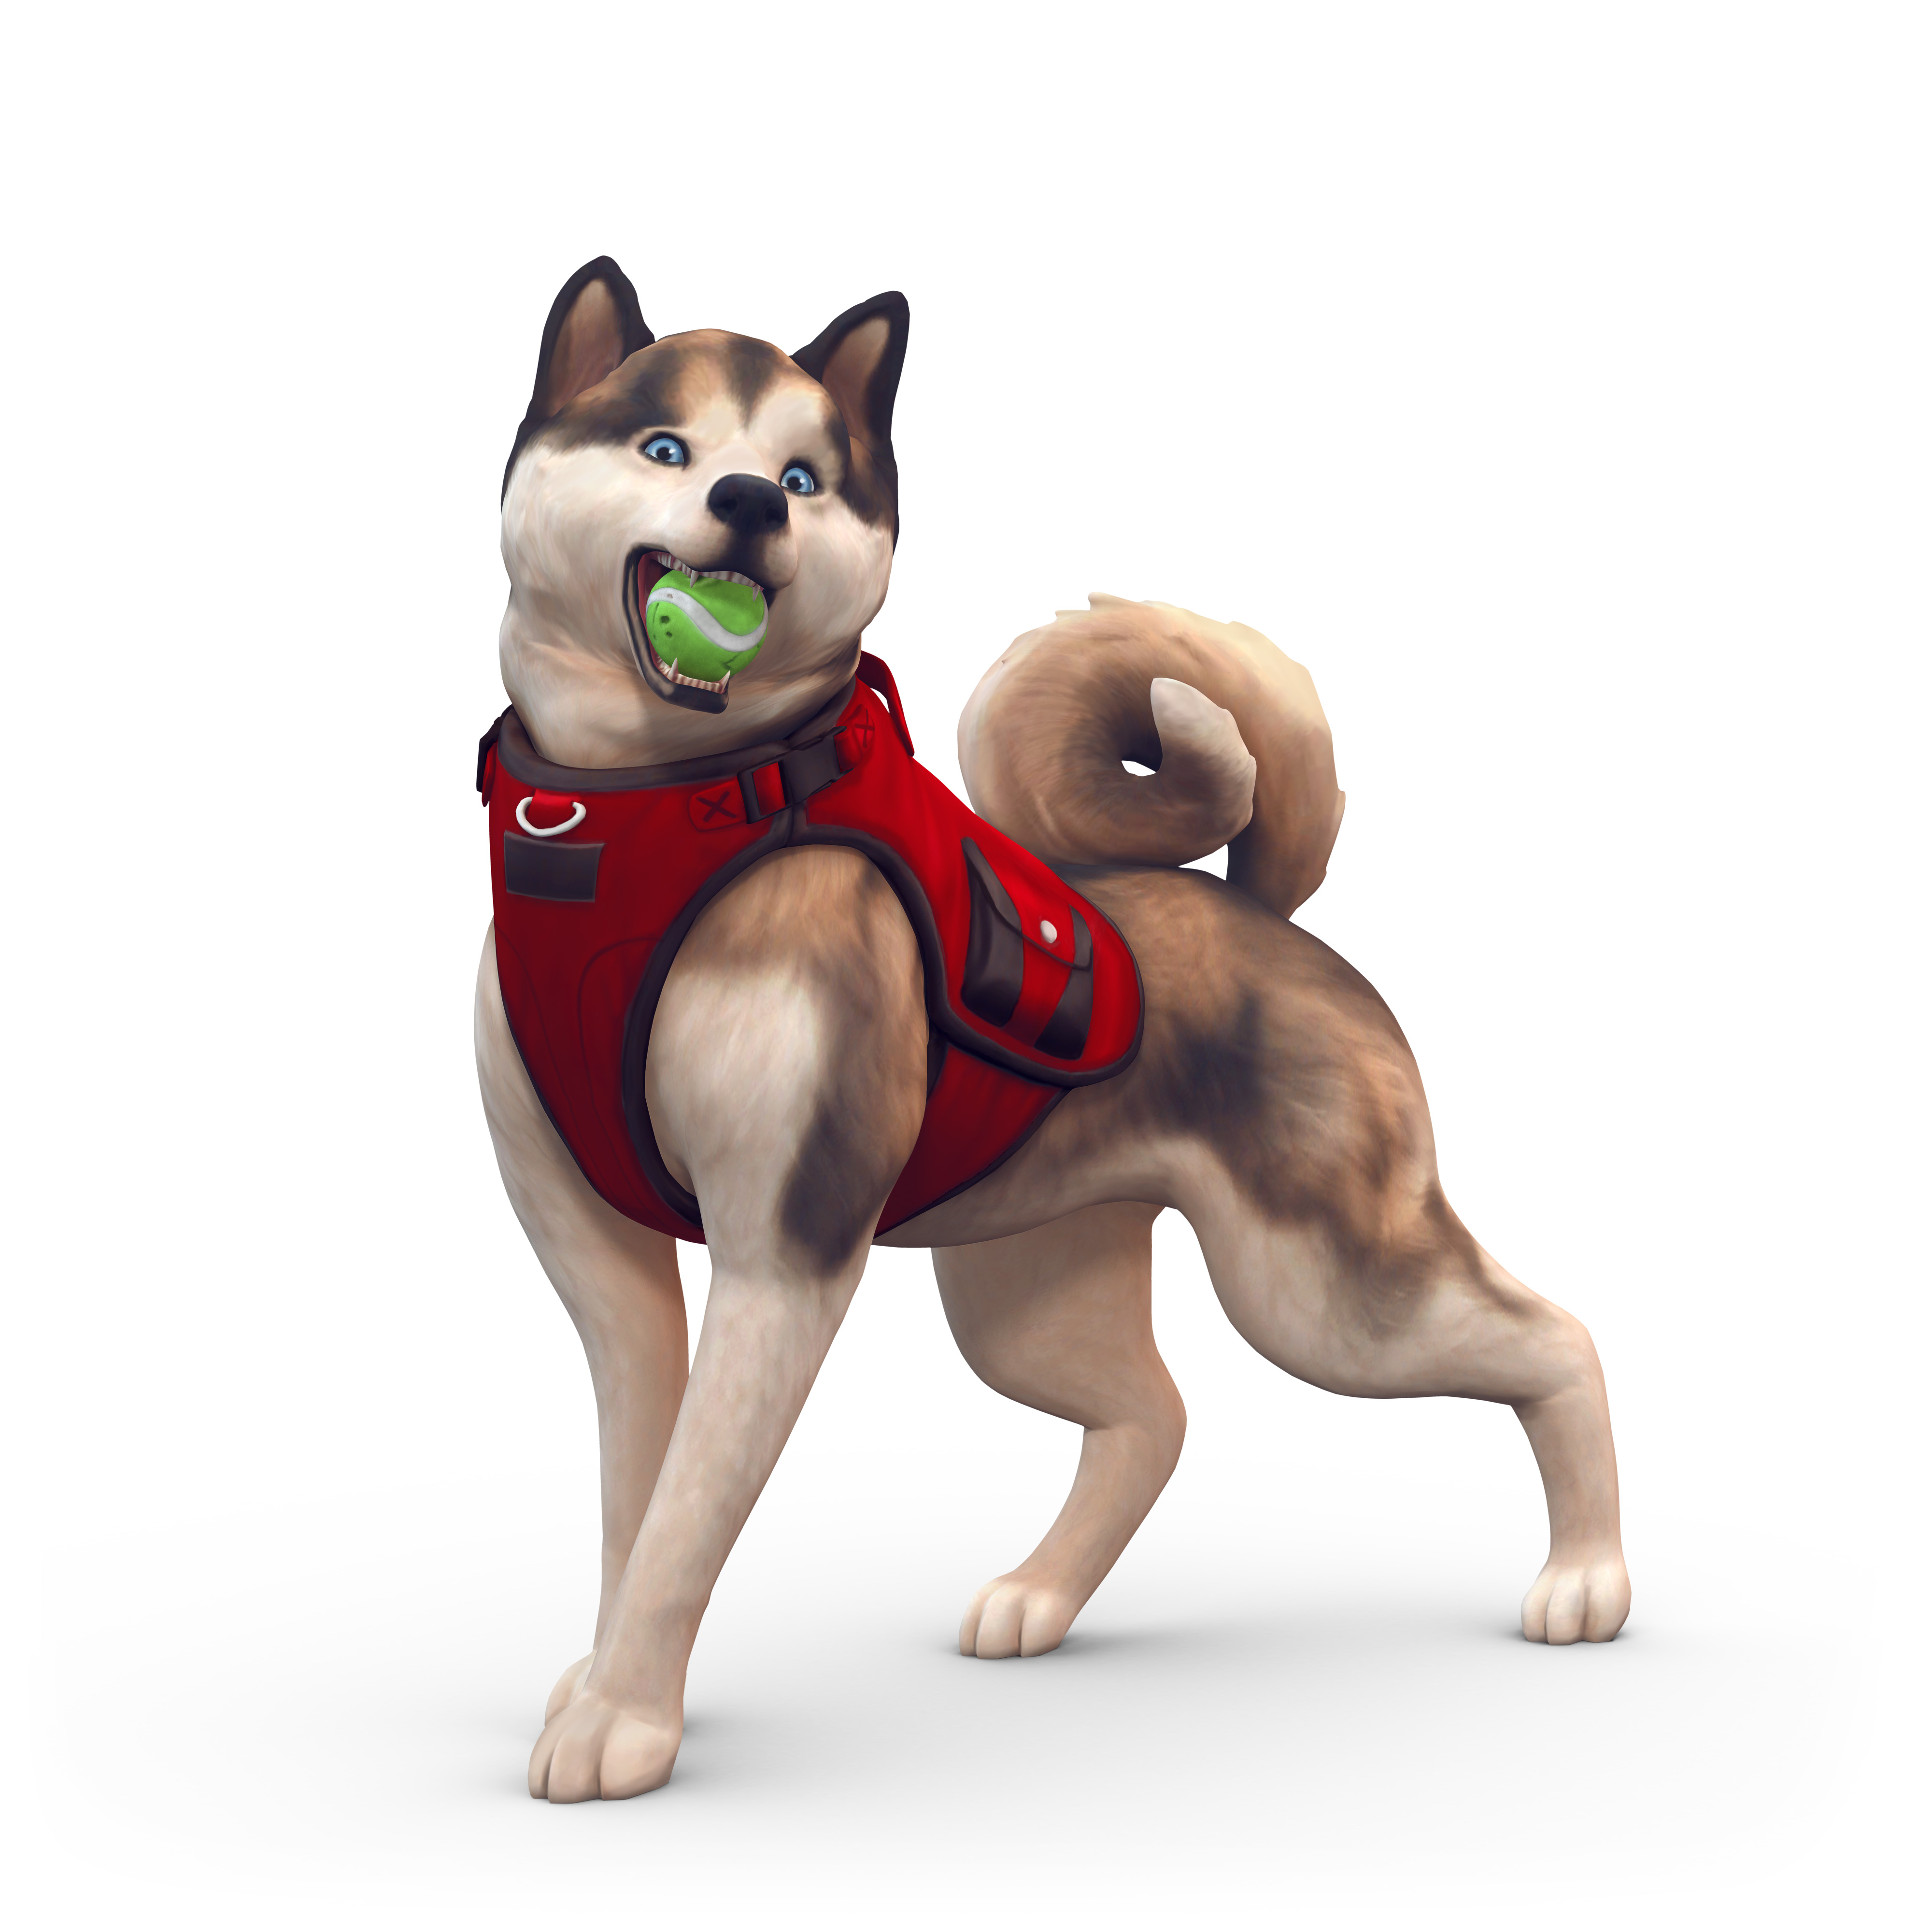 Sims 4 cats and dogs free